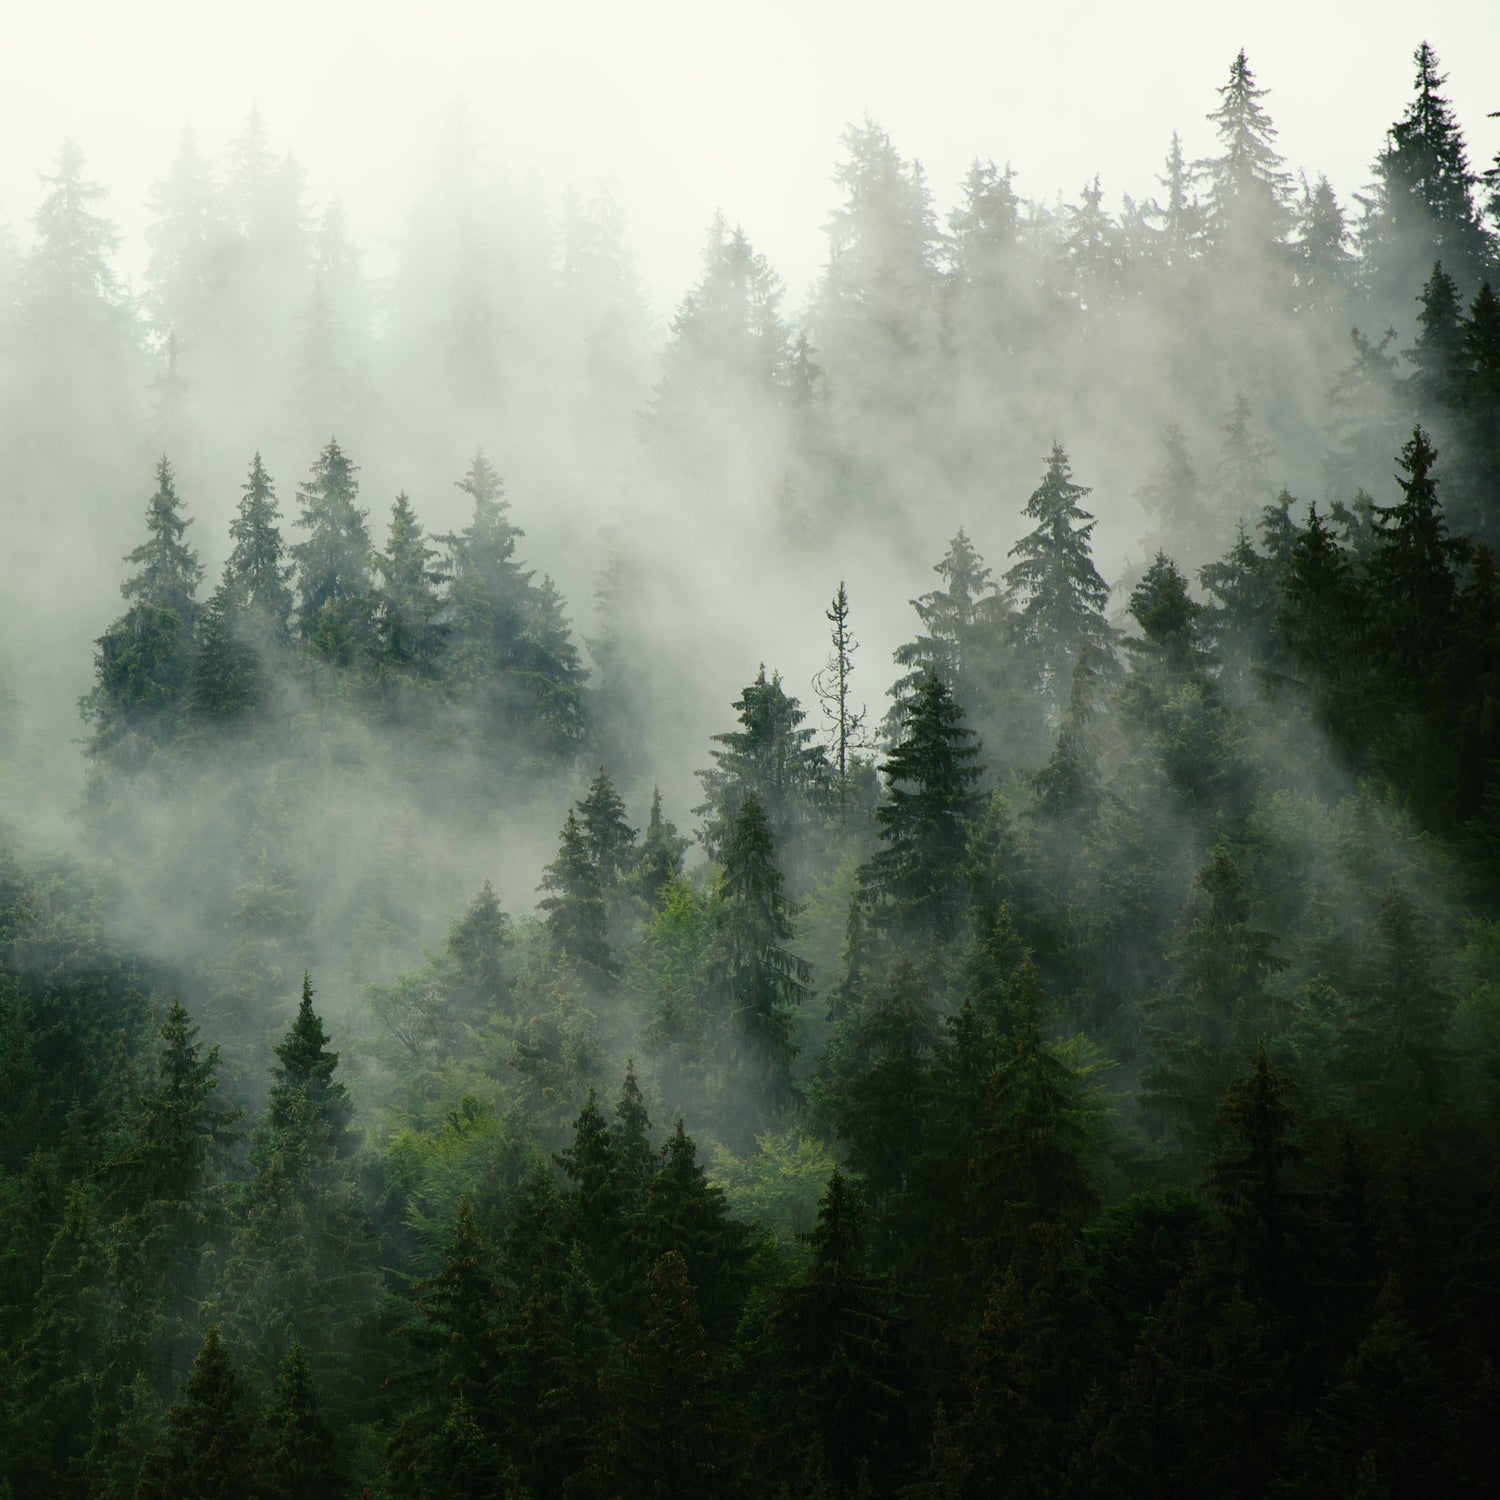 Foggy pine forests - an inpiration for this fresh scented candle